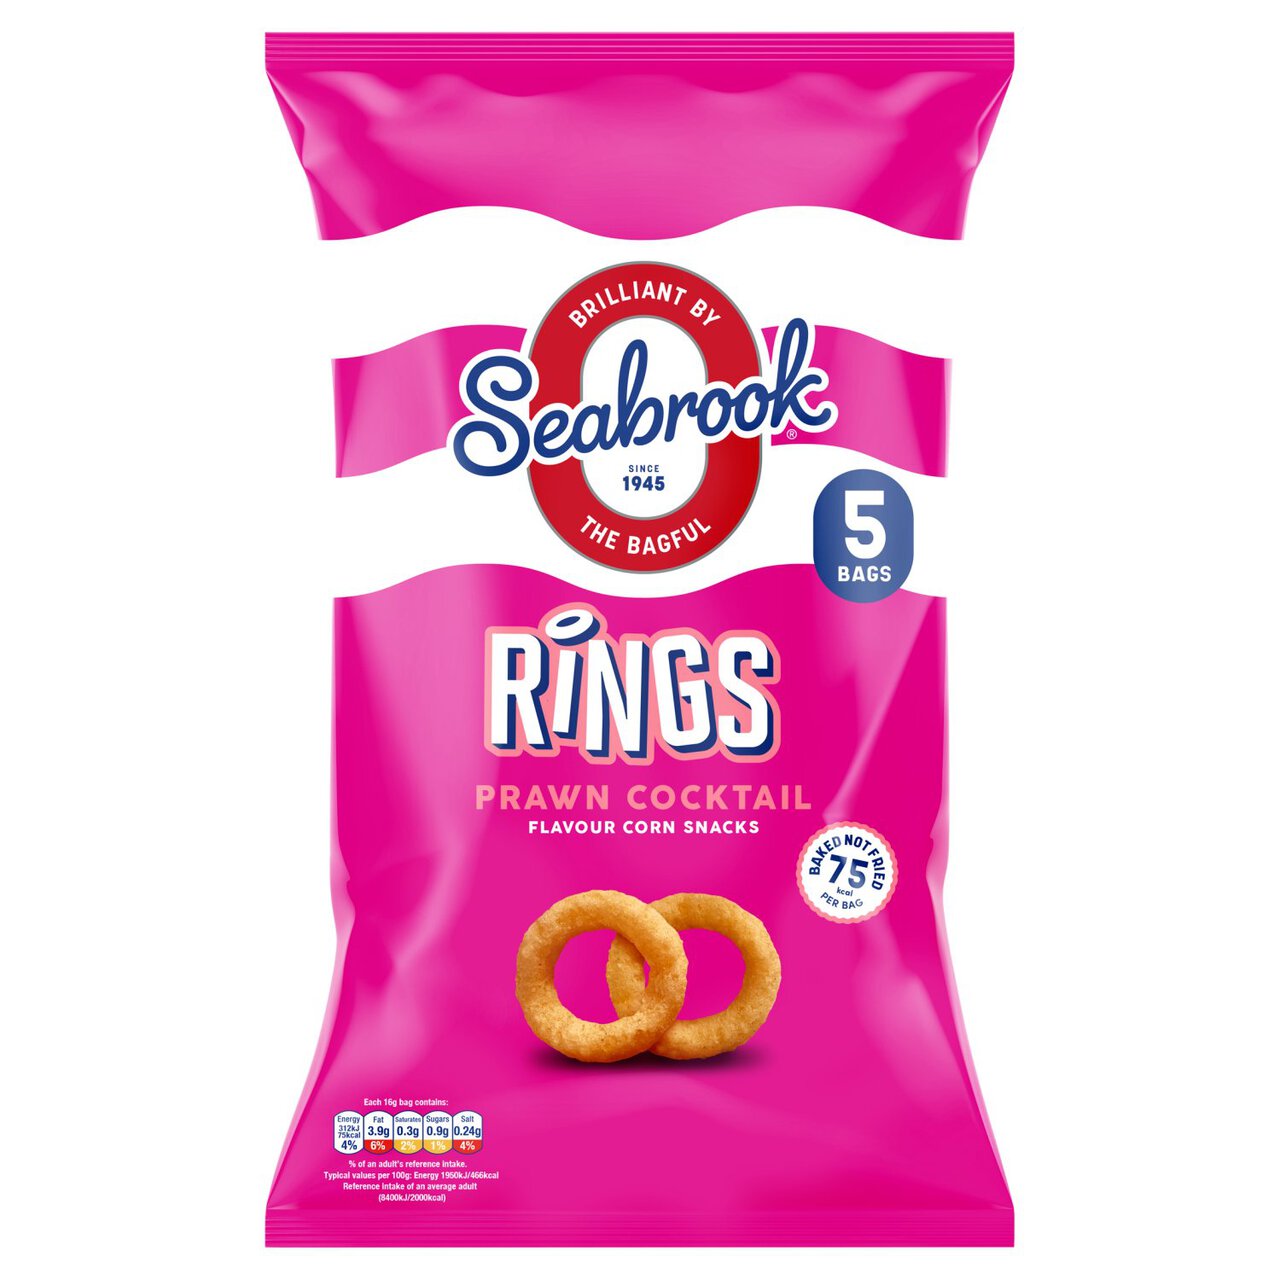 Seabrook Loaded Rings Prawn Cocktail 5 x 16g